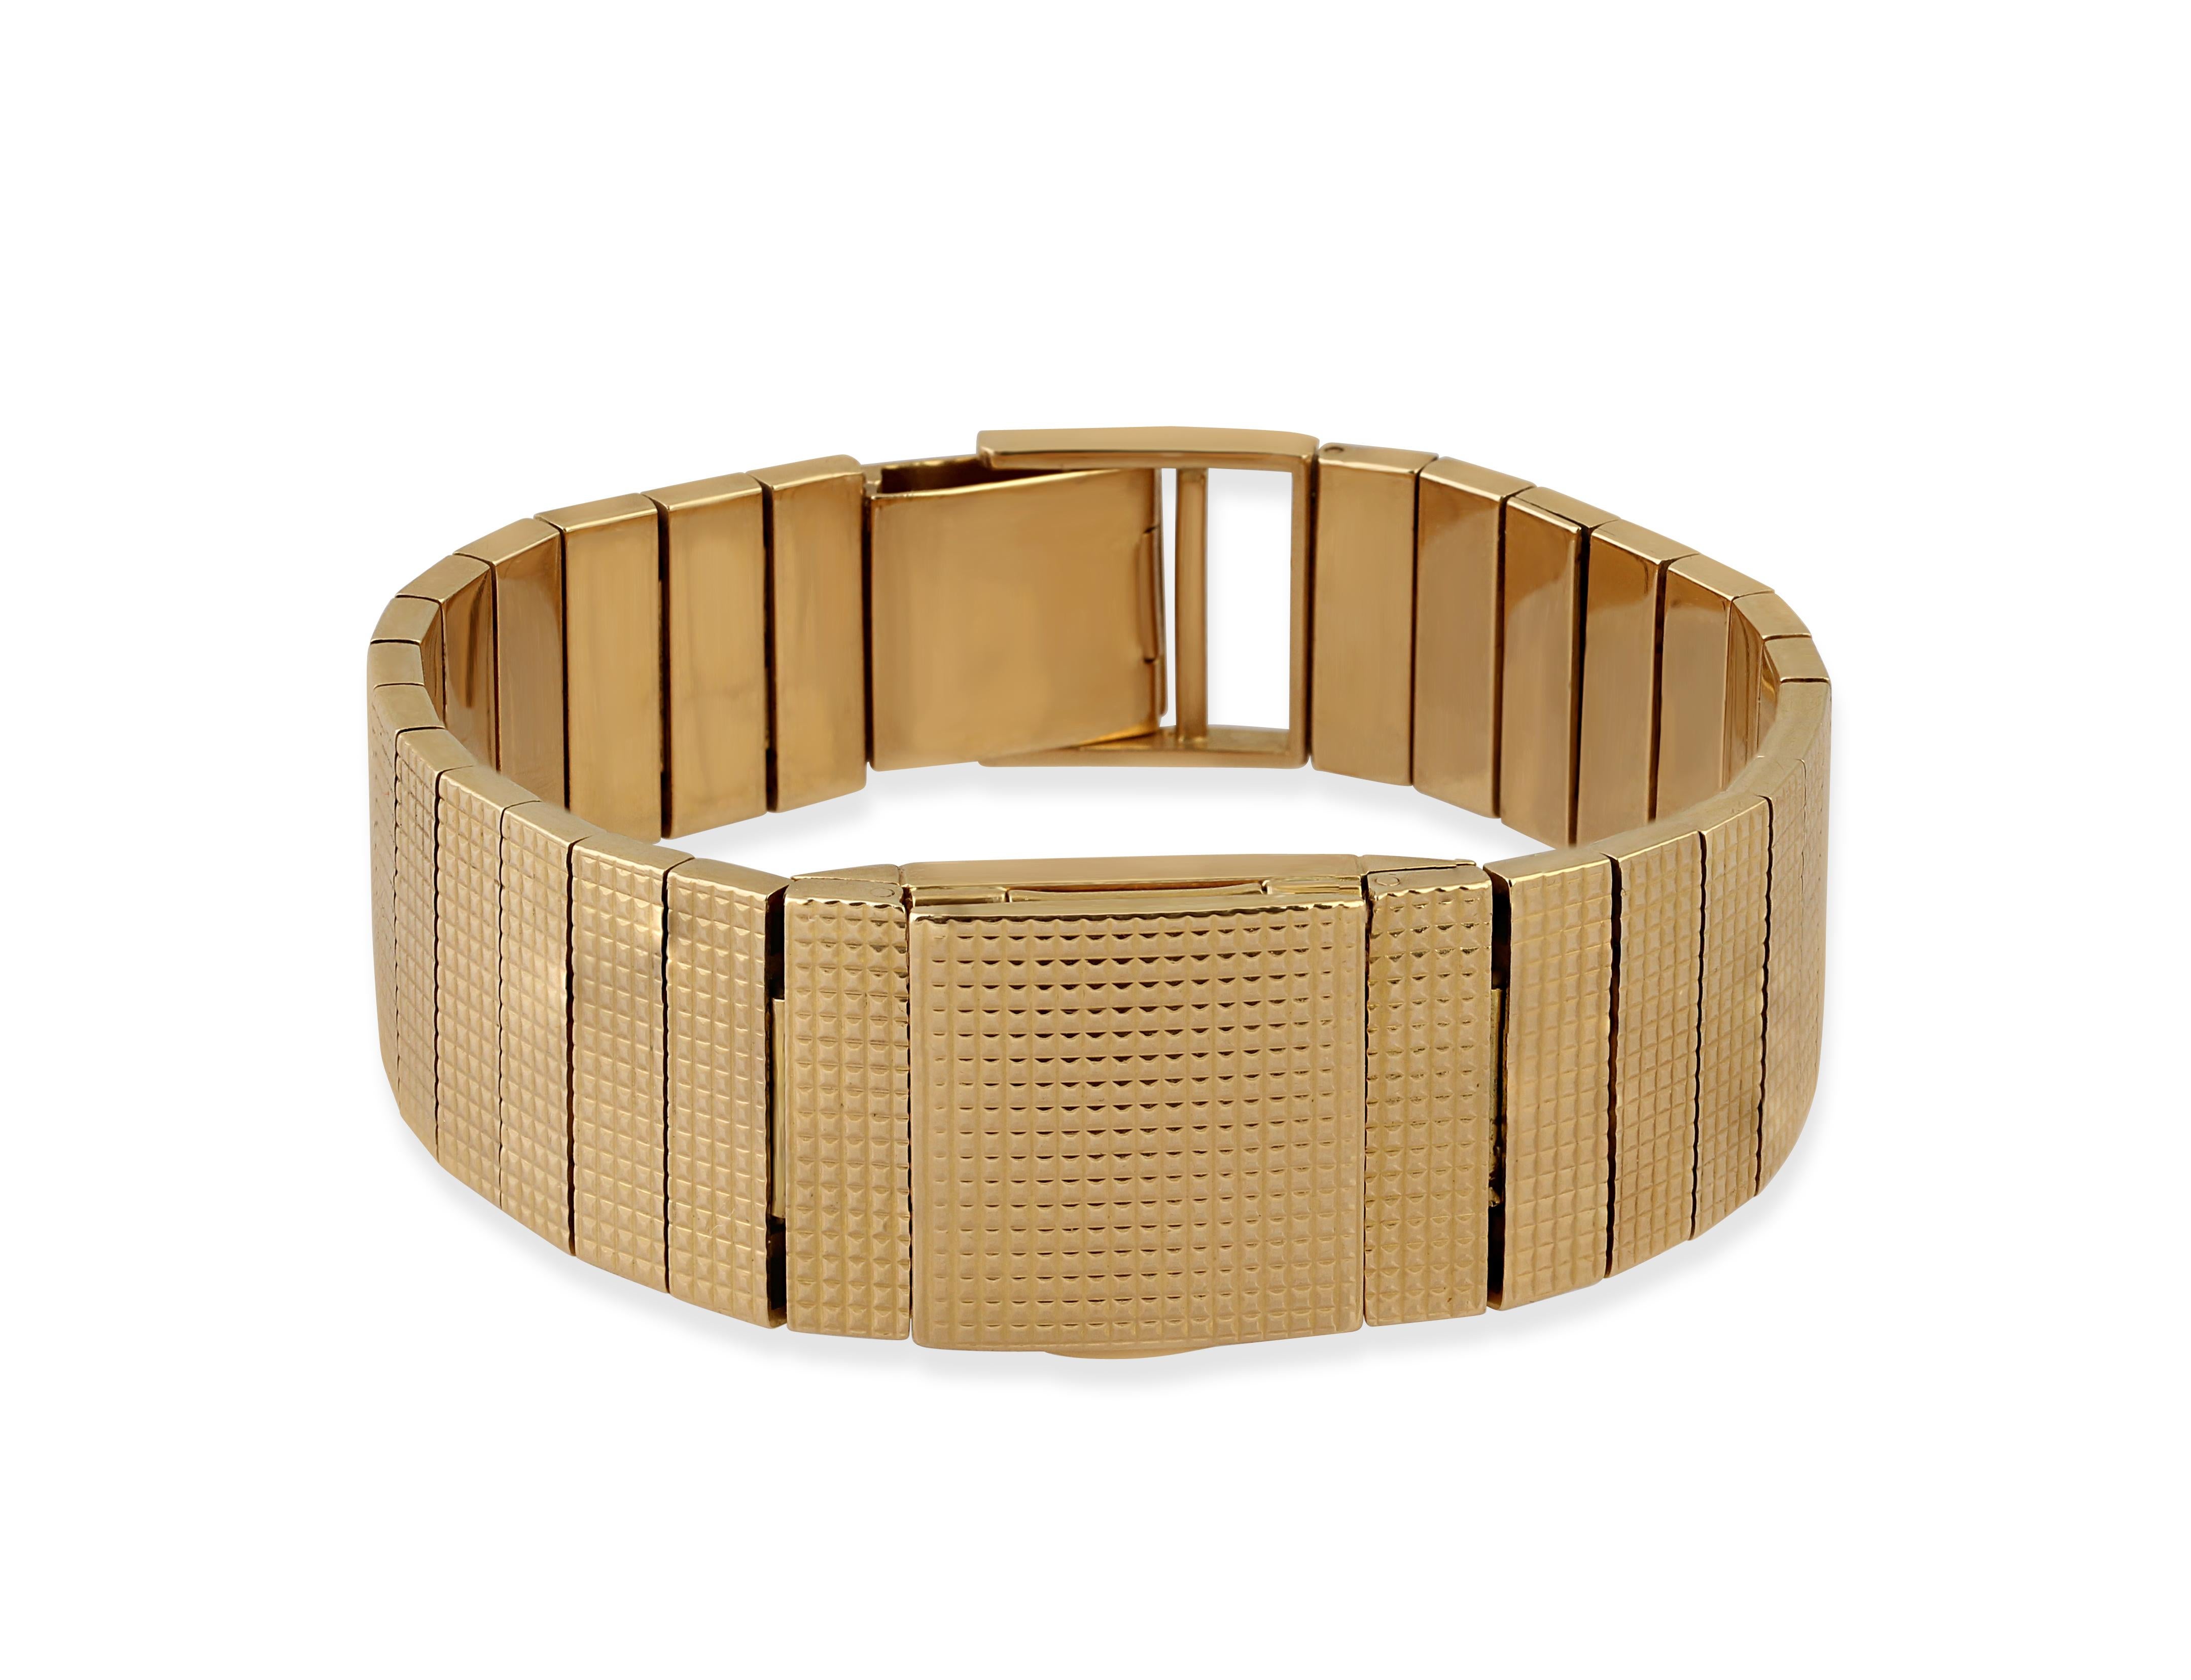 An 18k yellow gold articulated panel concealed watch bracelet by Jaeger LeCoultre

Length: 18.5cm
Weight: 67gr
